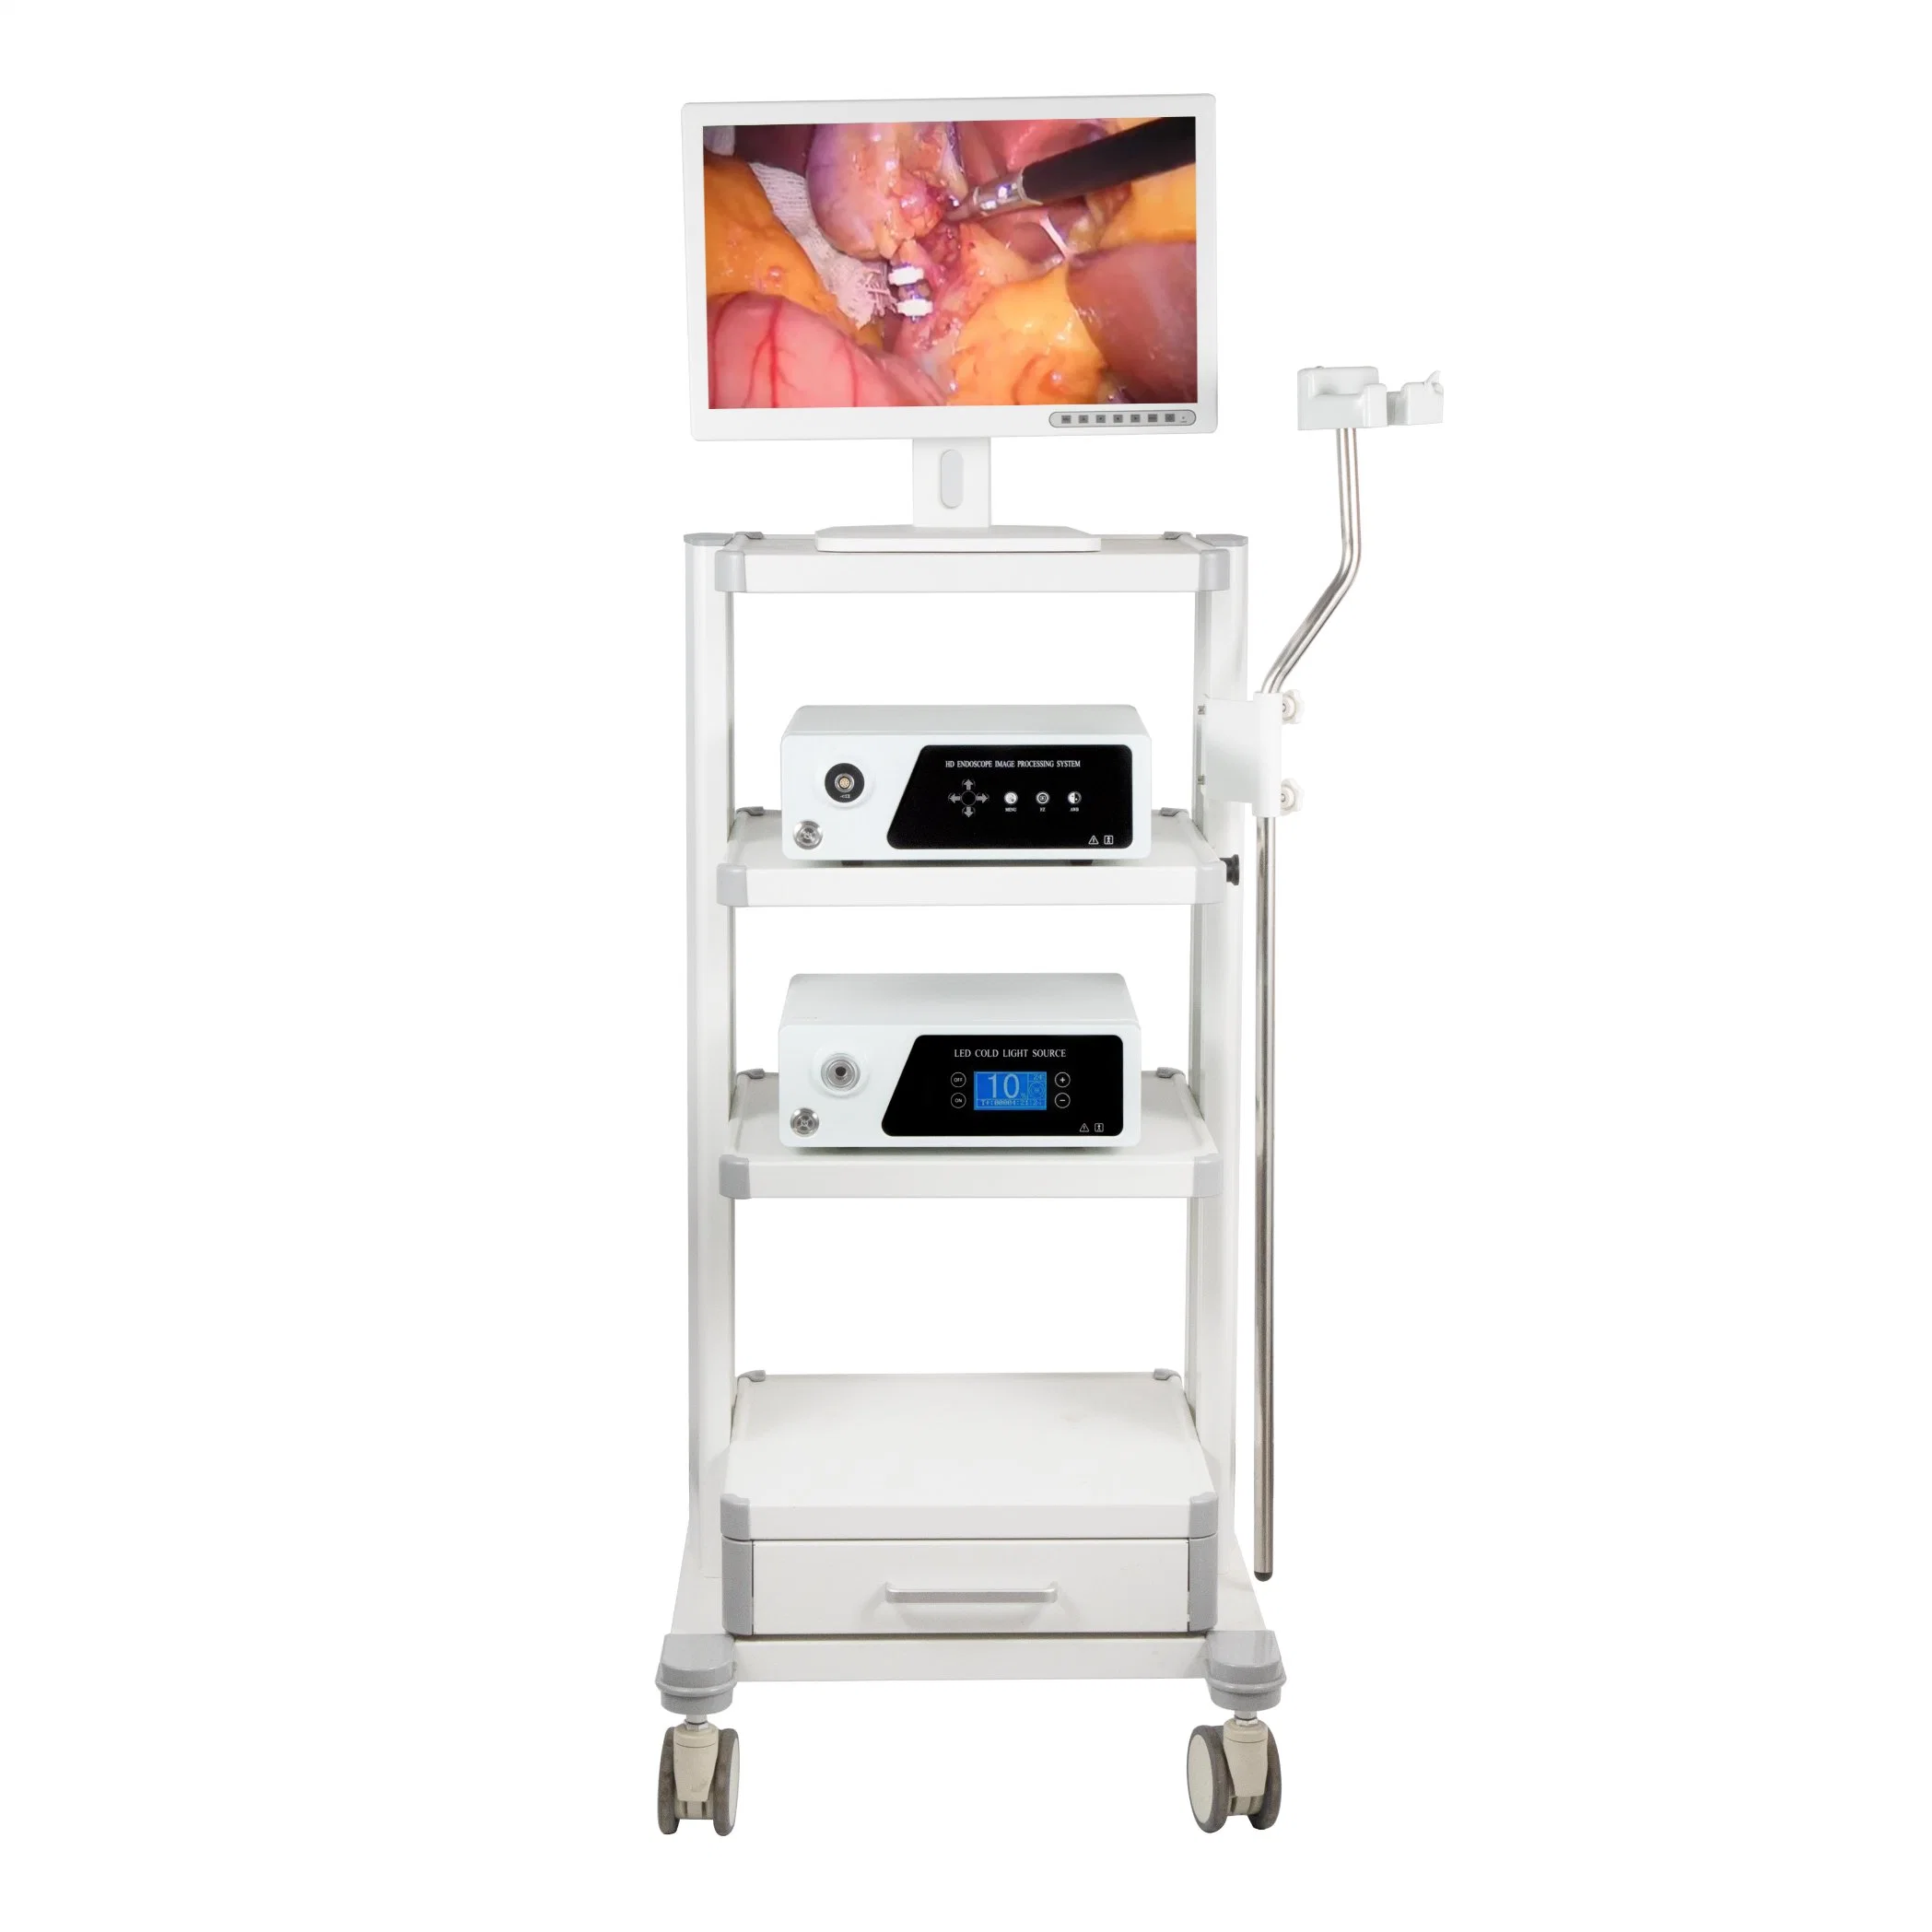 Medical HD Equipment for Diagnosis